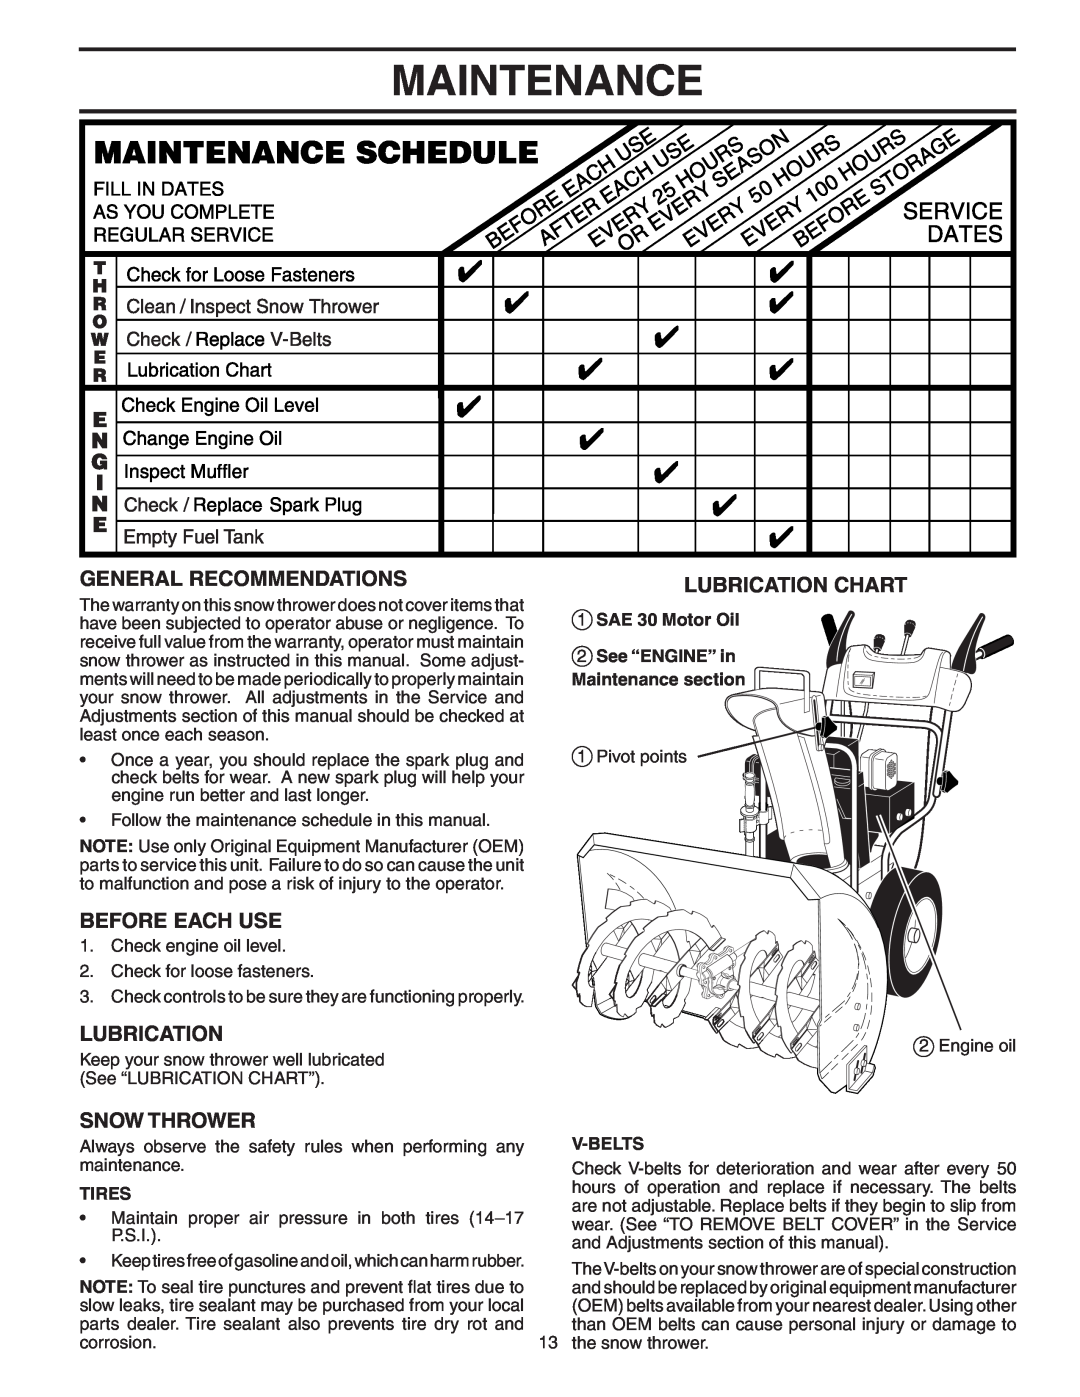 Poulan B8527ES Maintenance, General Recommendations, Before Each Use, Lubrication Chart, Snow Thrower, Tires, V-Belts 